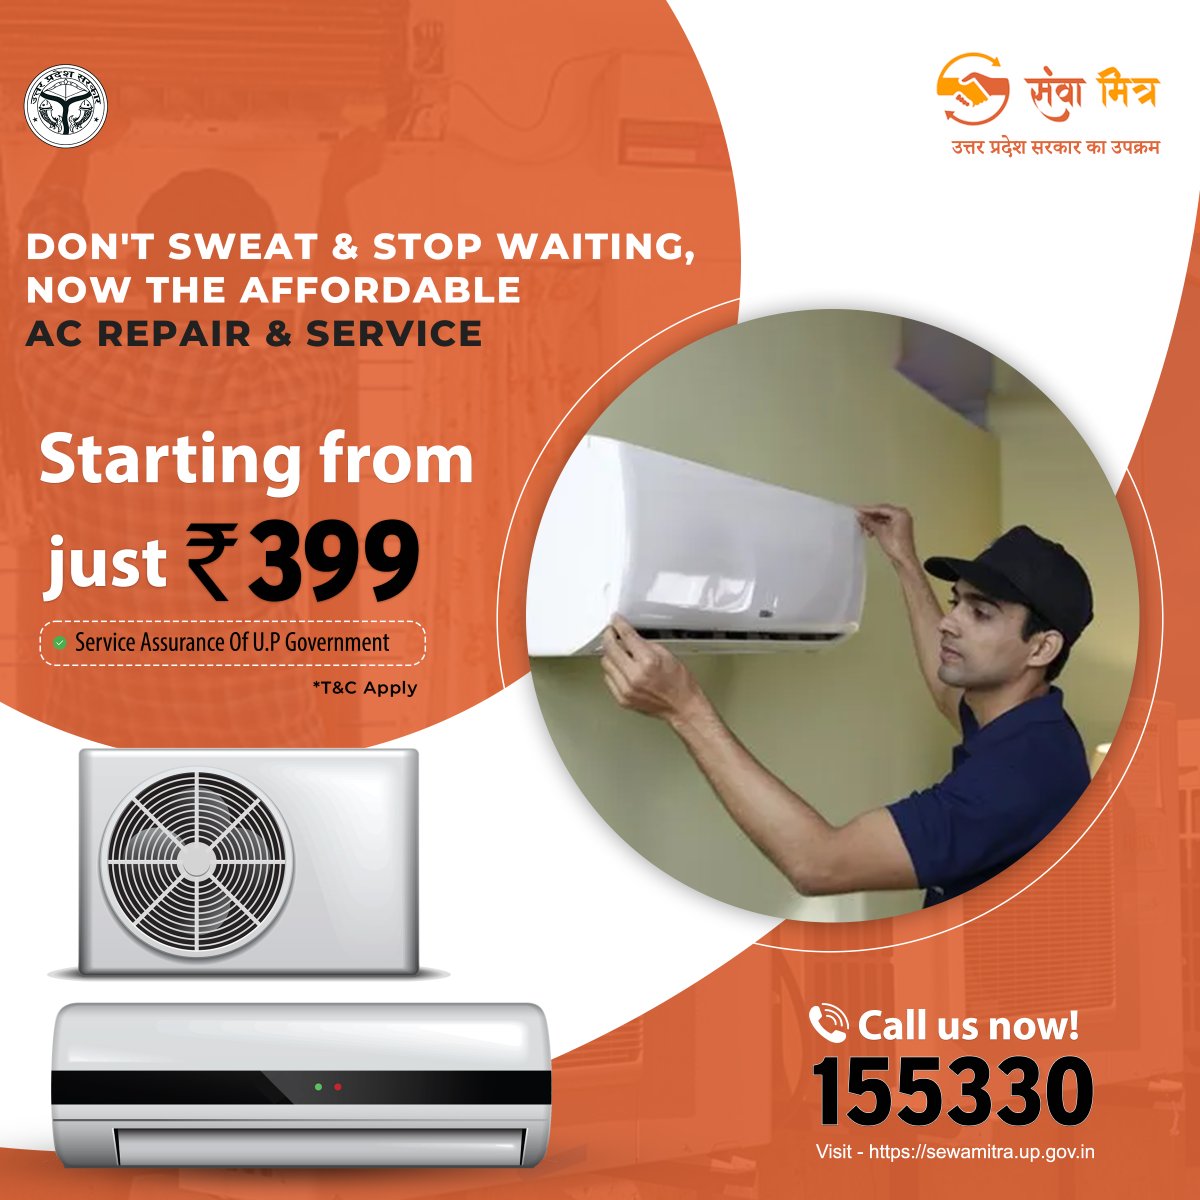 'Your comfort is our priority: AC service and repair.'
'Beat the heat with our reliable📷📷 AC repair.'

visit: sewamitra.up.gov.in

#airconditioning #heating #hvaclife #airconditioner #hvacservice #ac #cooling #hvactechnician #hvactech 

— feeling cool in Uttar Pradesh.